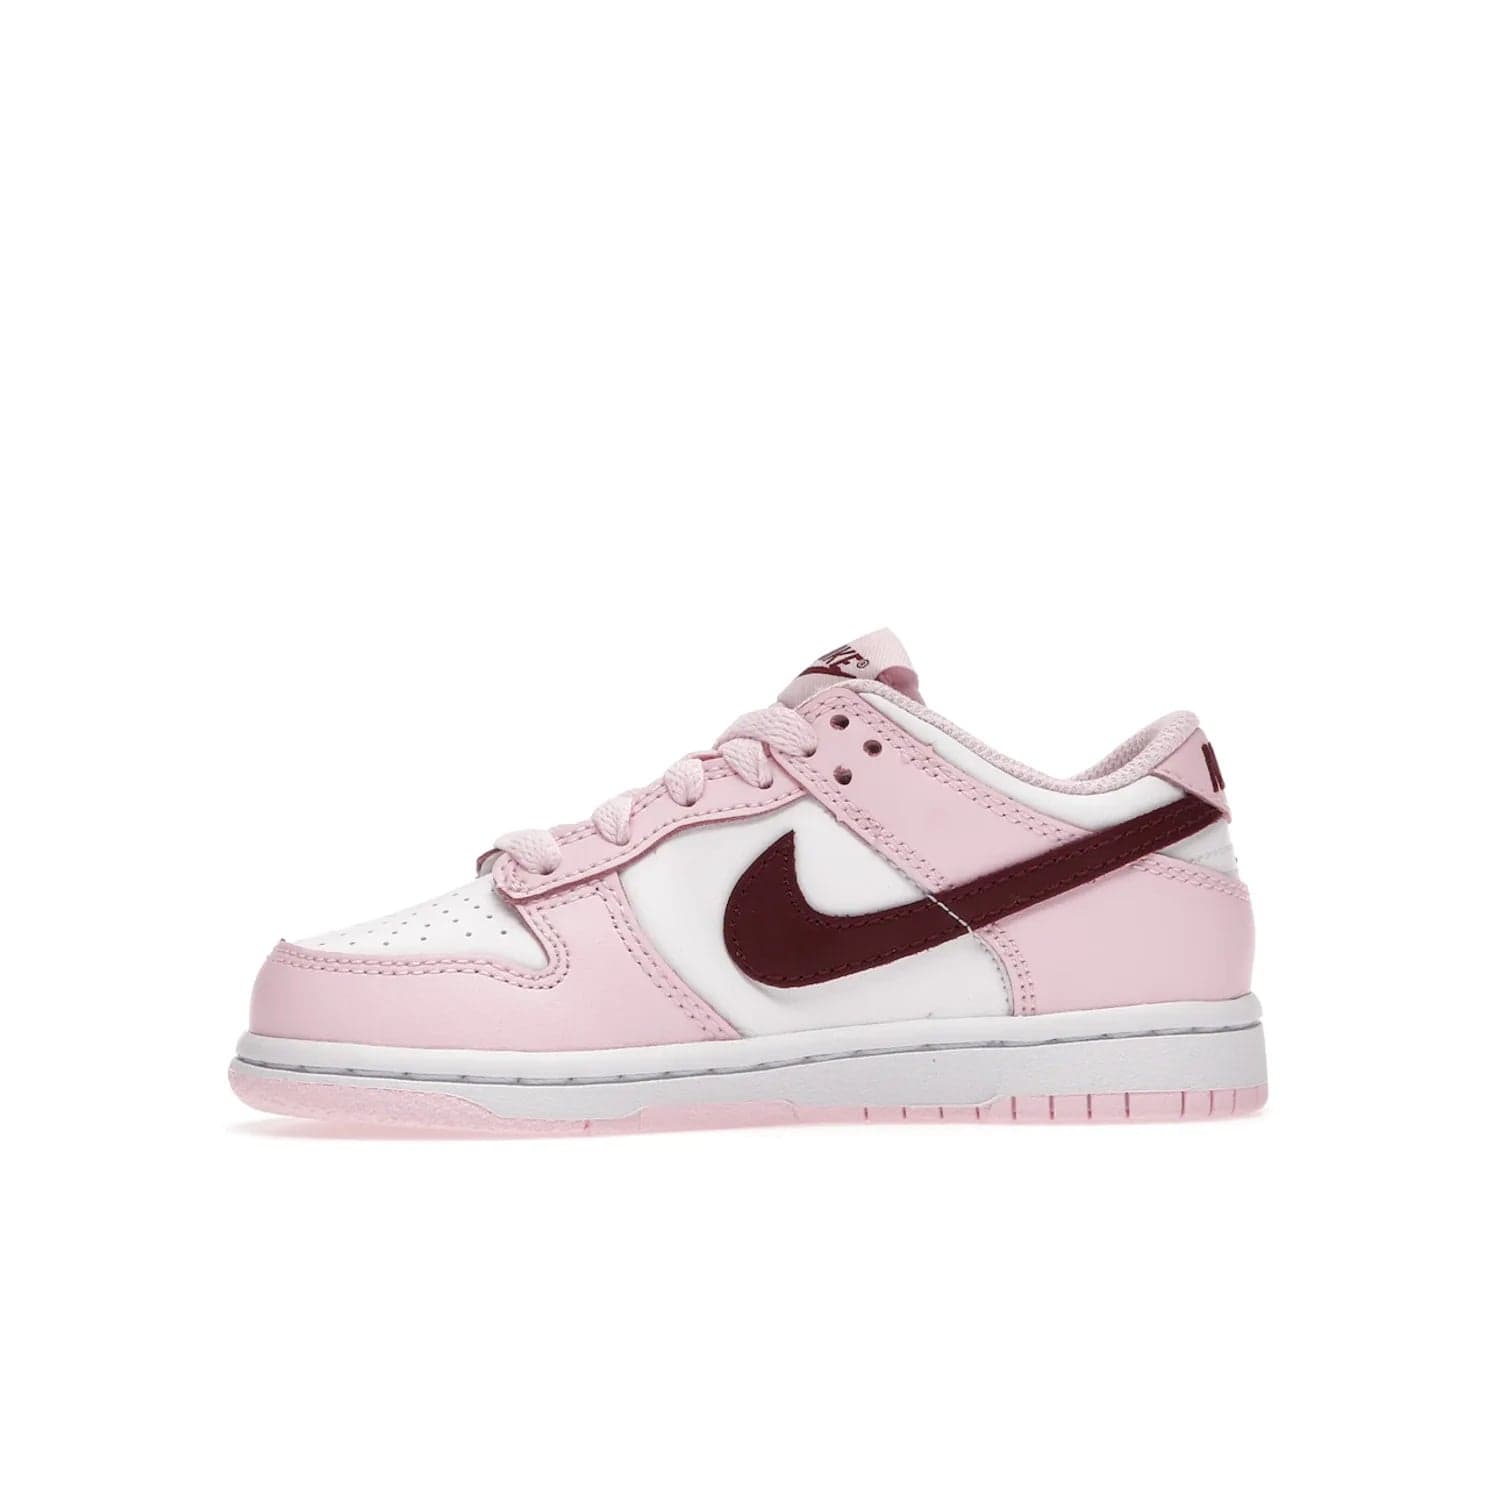 Nike Dunk Low Pink Red White (PS) - Image 18 - Only at www.BallersClubKickz.com - Introducing the Nike Dunk Low Pink Red White (PS), the perfect addition to your sneaker collection. A classic silhouette with modern vibrant colors, including a pink upper with red and white accents and a white midsole. Comfort and durability, perfect for any outfit. Limited edition, available June 22nd.